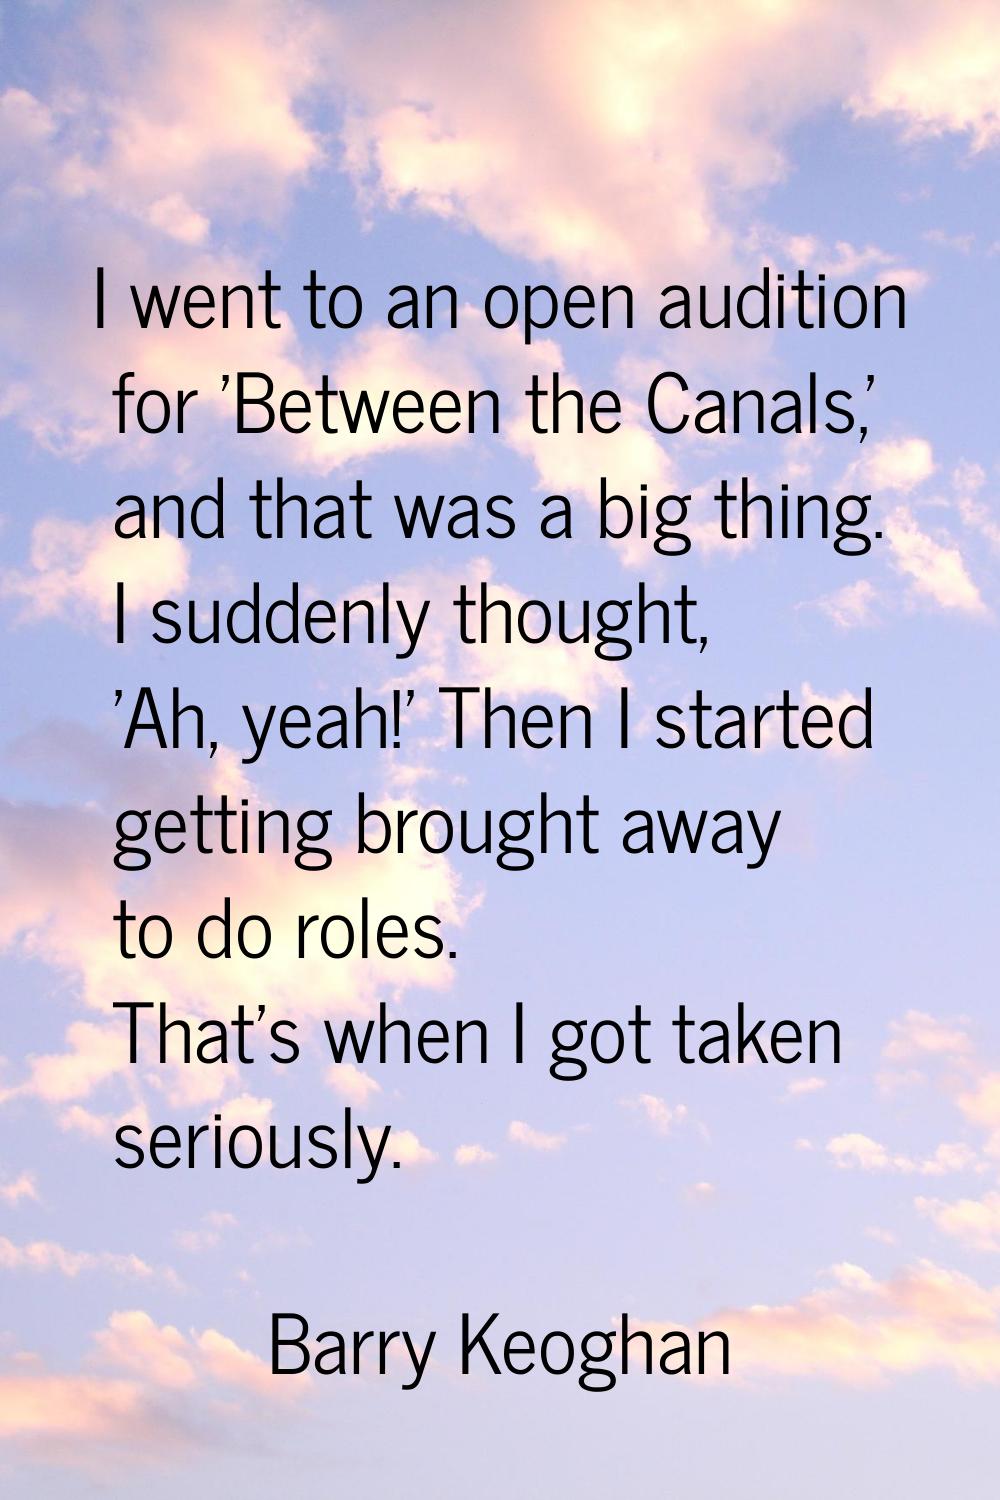 I went to an open audition for 'Between the Canals,' and that was a big thing. I suddenly thought, 